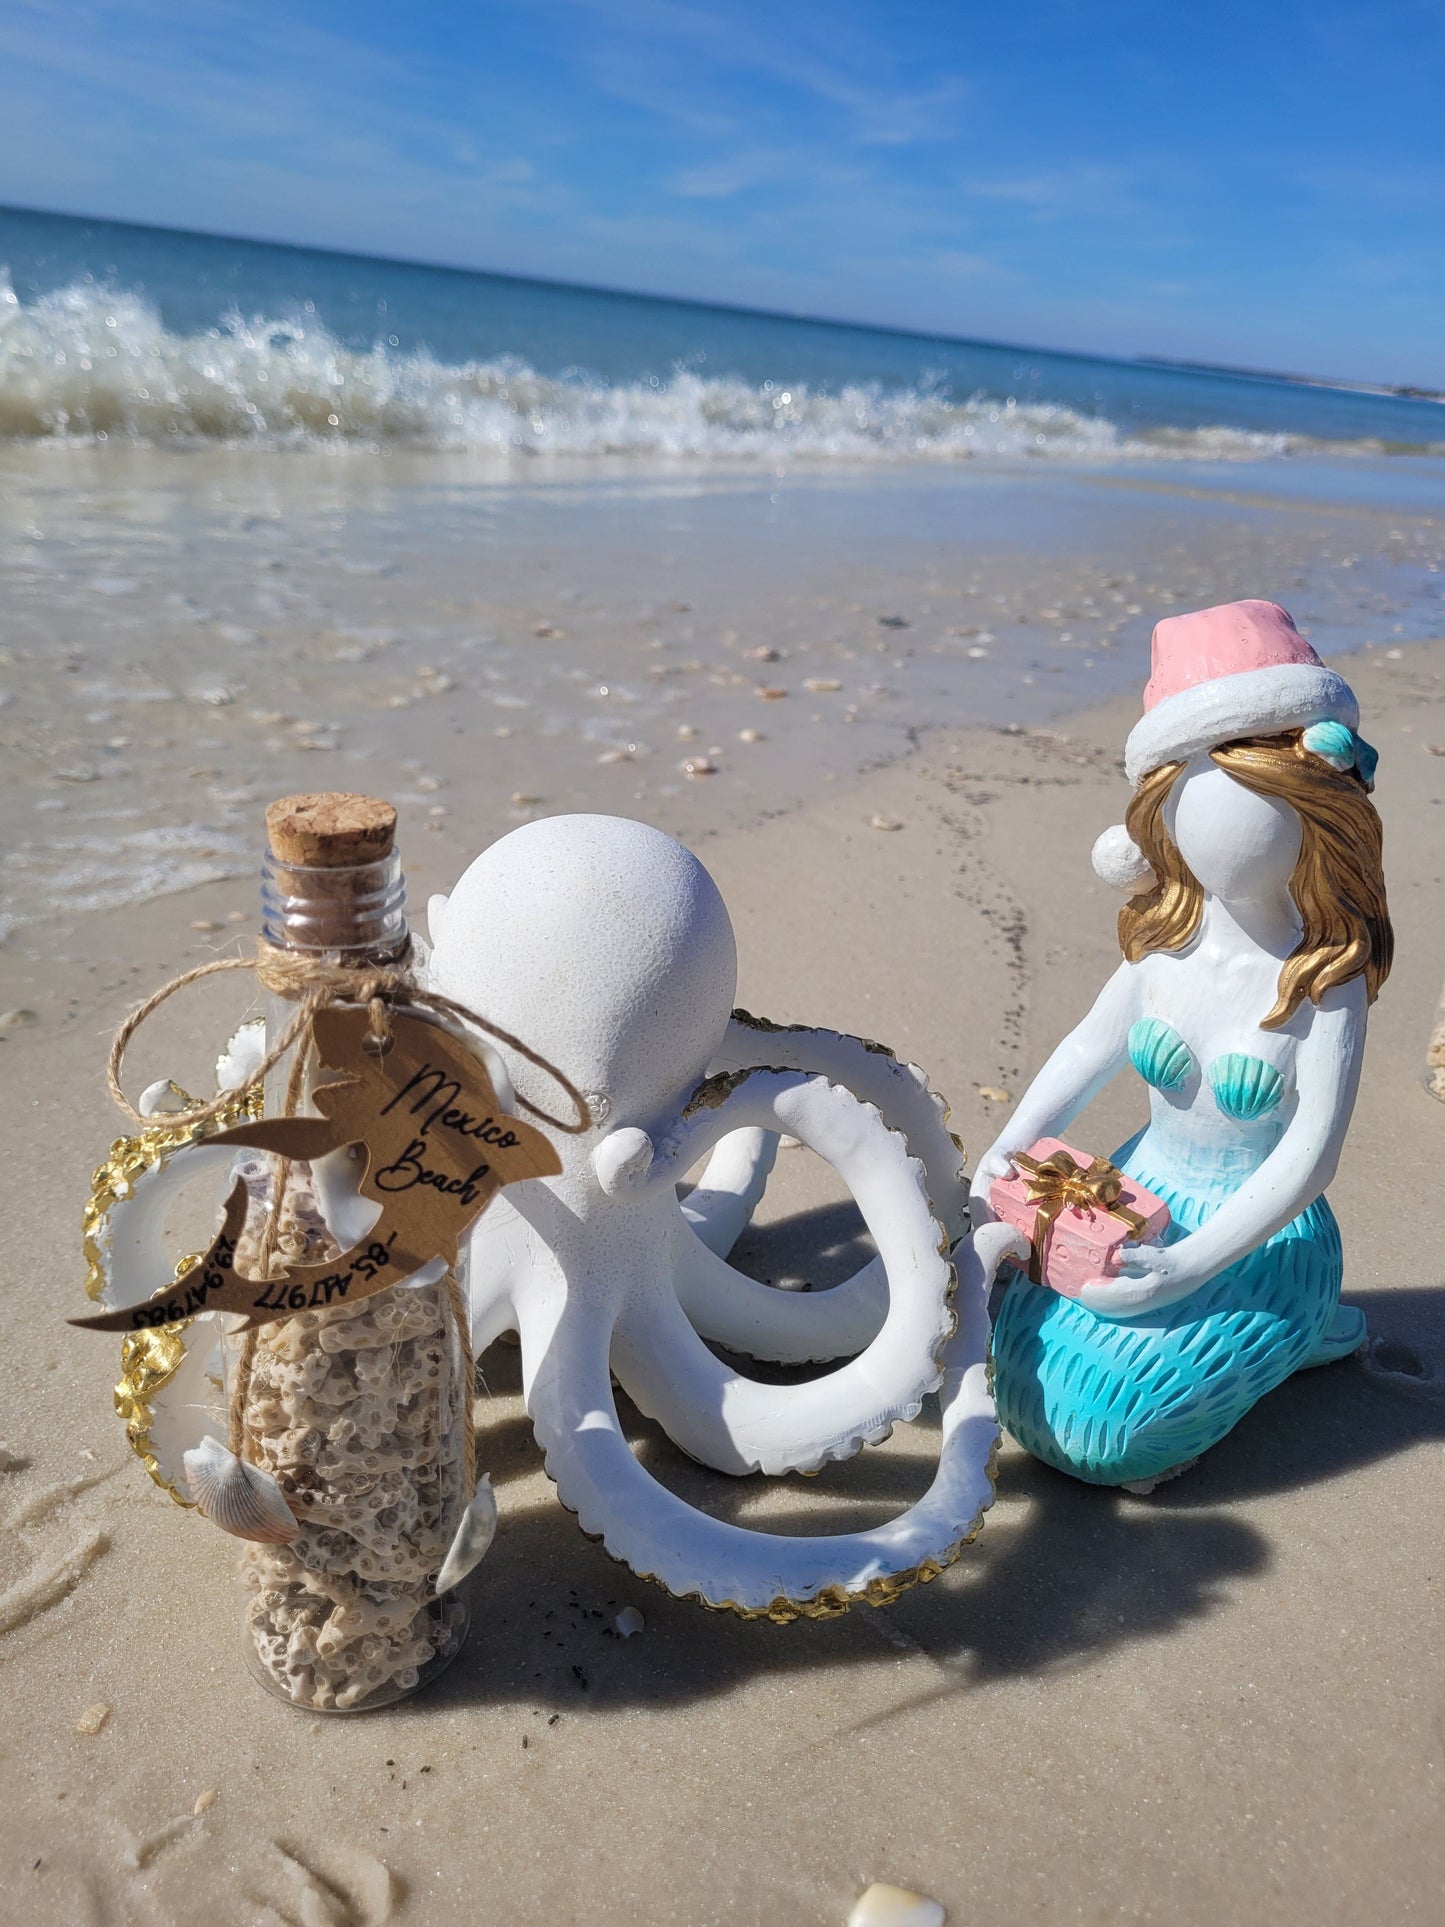 Coastal Elegant Decor: 6.5" Clear Plastic Bottle w/ Hand-Picked Shells & Coral from Mexico Beach, FL – Ocean-Themed Charm with Exclusive Mexico Beach Coordinates Tag